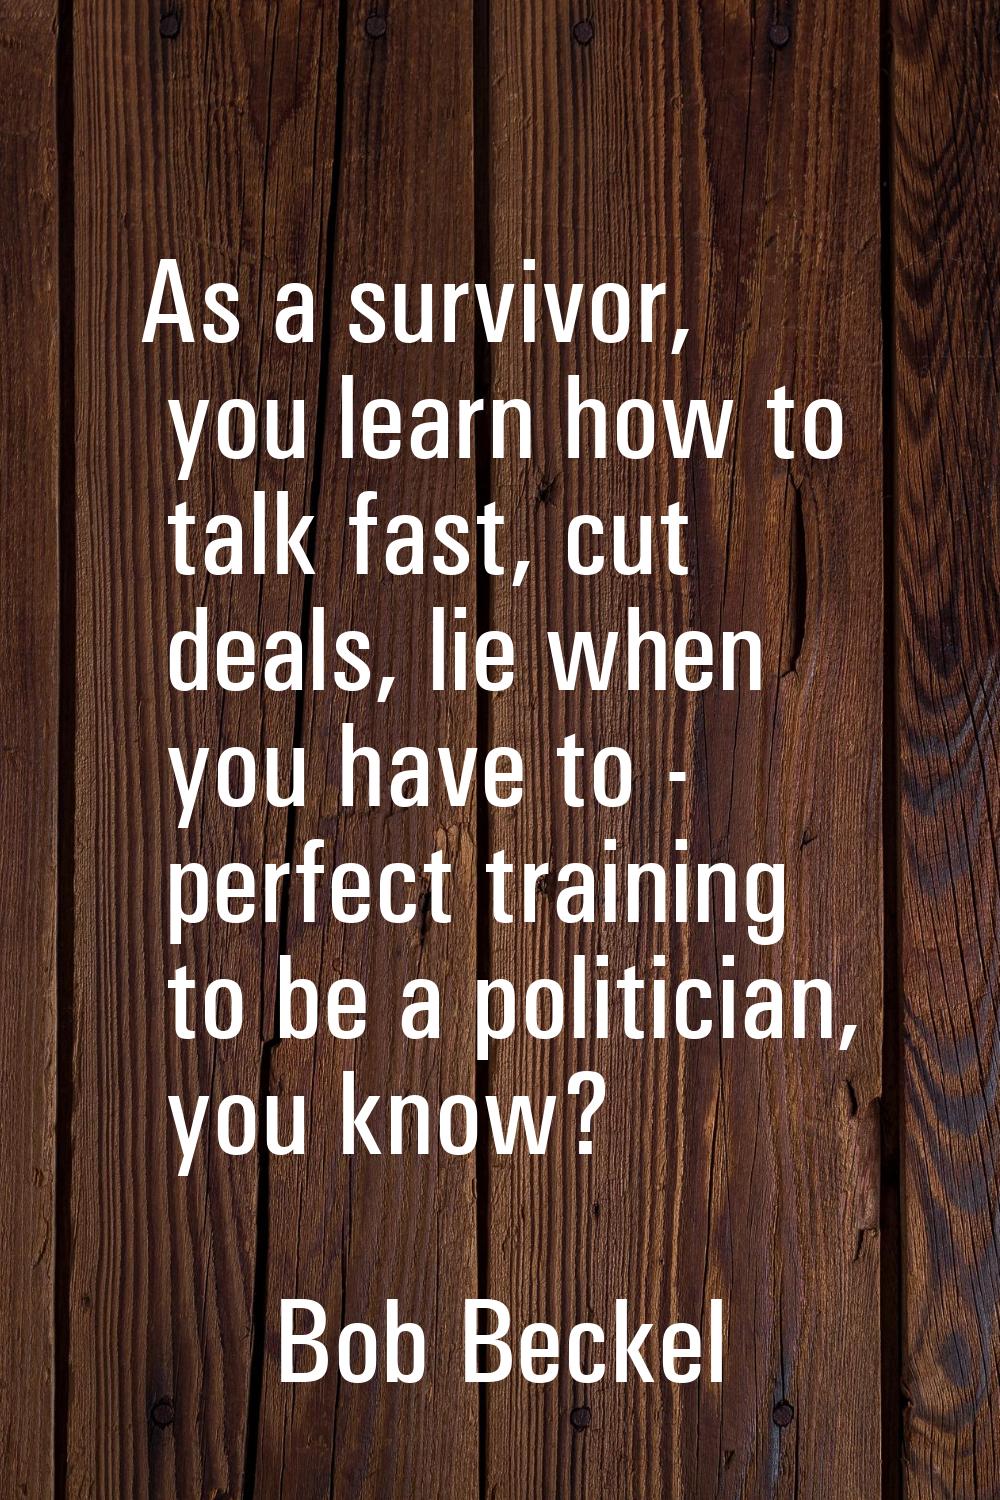 As a survivor, you learn how to talk fast, cut deals, lie when you have to - perfect training to be